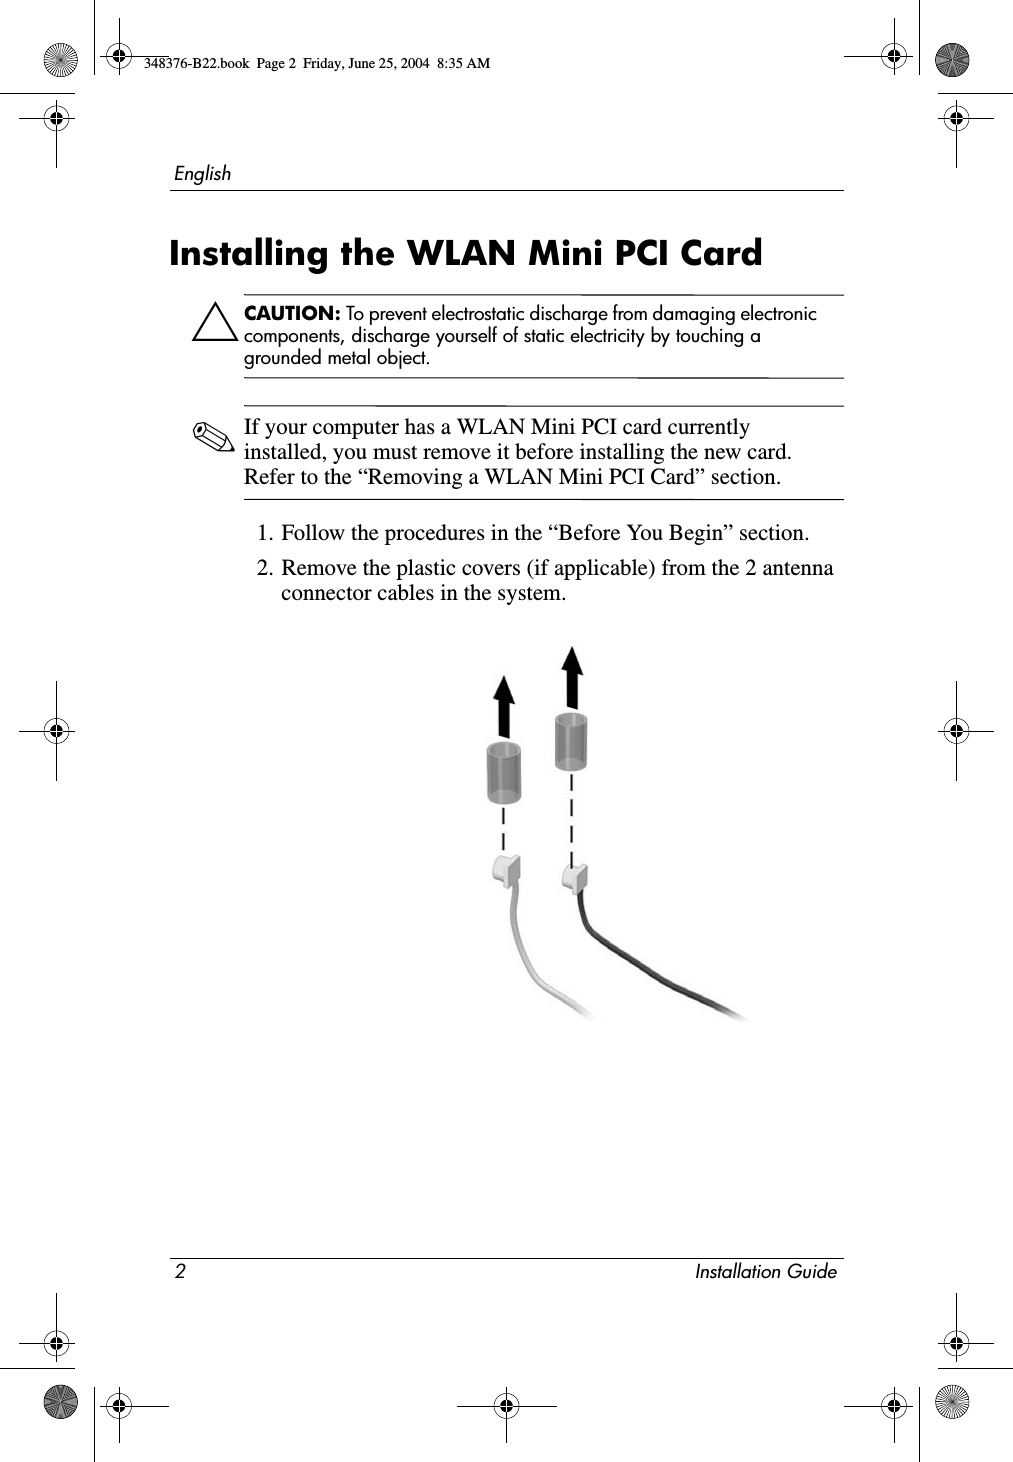 2 Installation GuideEnglishInstalling the WLAN Mini PCI CardÄCAUTION: To prevent electrostatic discharge from damaging electronic components, discharge yourself of static electricity by touching a grounded metal object.✎If your computer has a WLAN Mini PCI card currently installed, you must remove it before installing the new card. Refer to the “Removing a WLAN Mini PCI Card” section.1. Follow the procedures in the “Before You Begin” section.2. Remove the plastic covers (if applicable) from the 2 antenna connector cables in the system.348376-B22.book  Page 2  Friday, June 25, 2004  8:35 AM